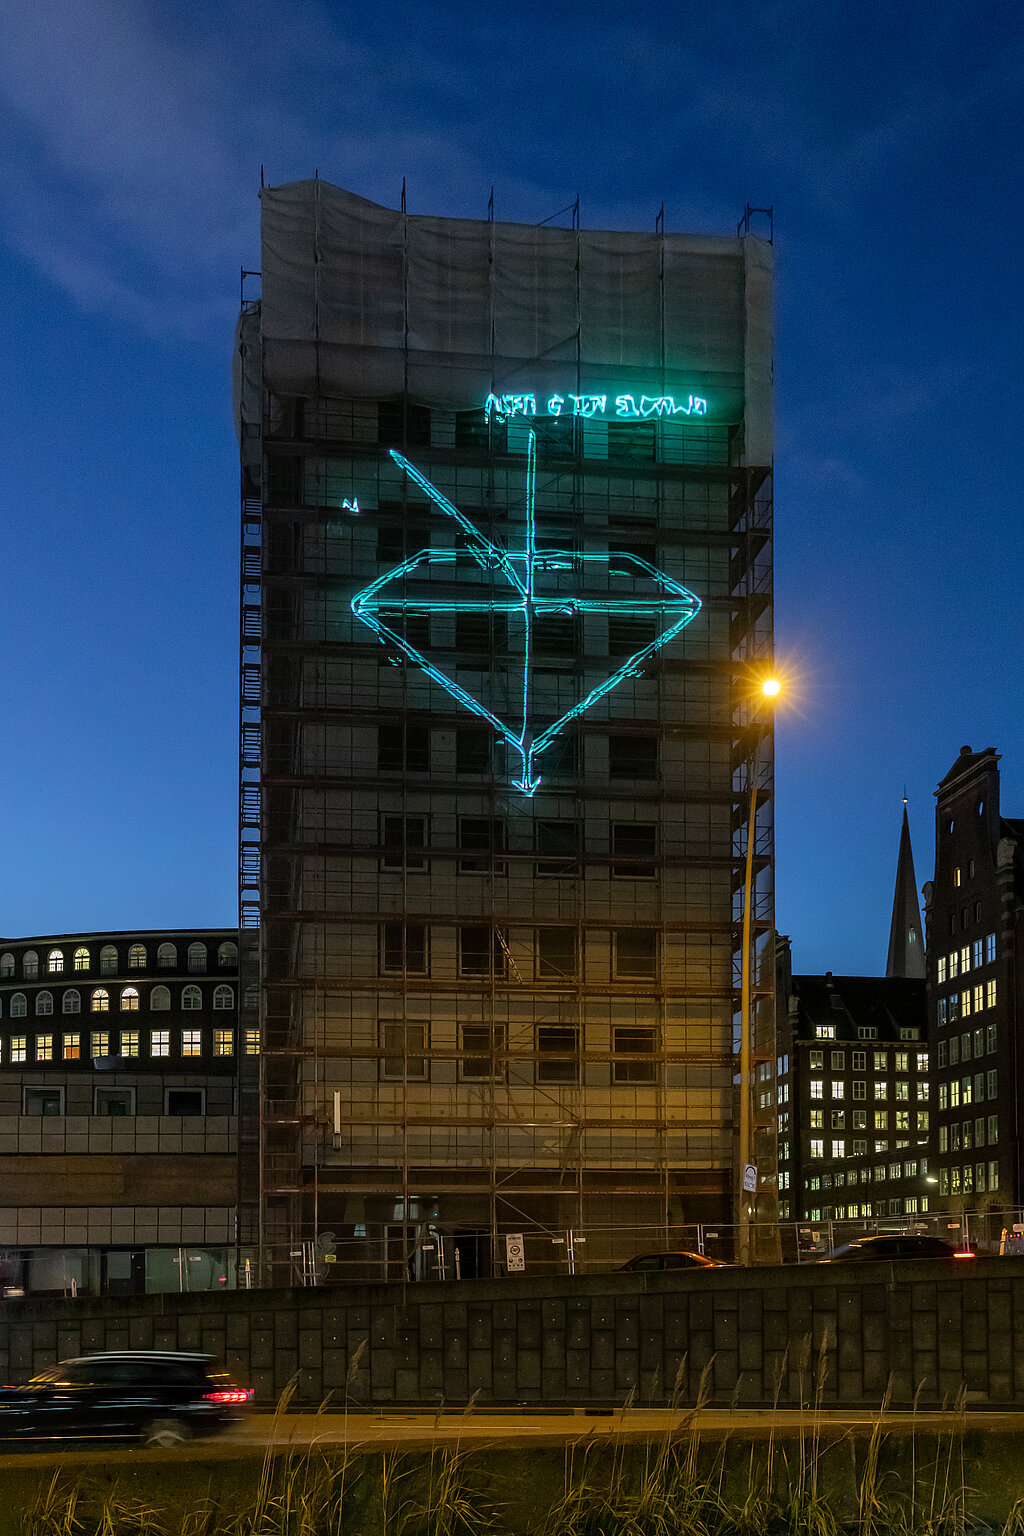 There will be a Lasershow across Kunstverein Harburger Bahnhof 2/5